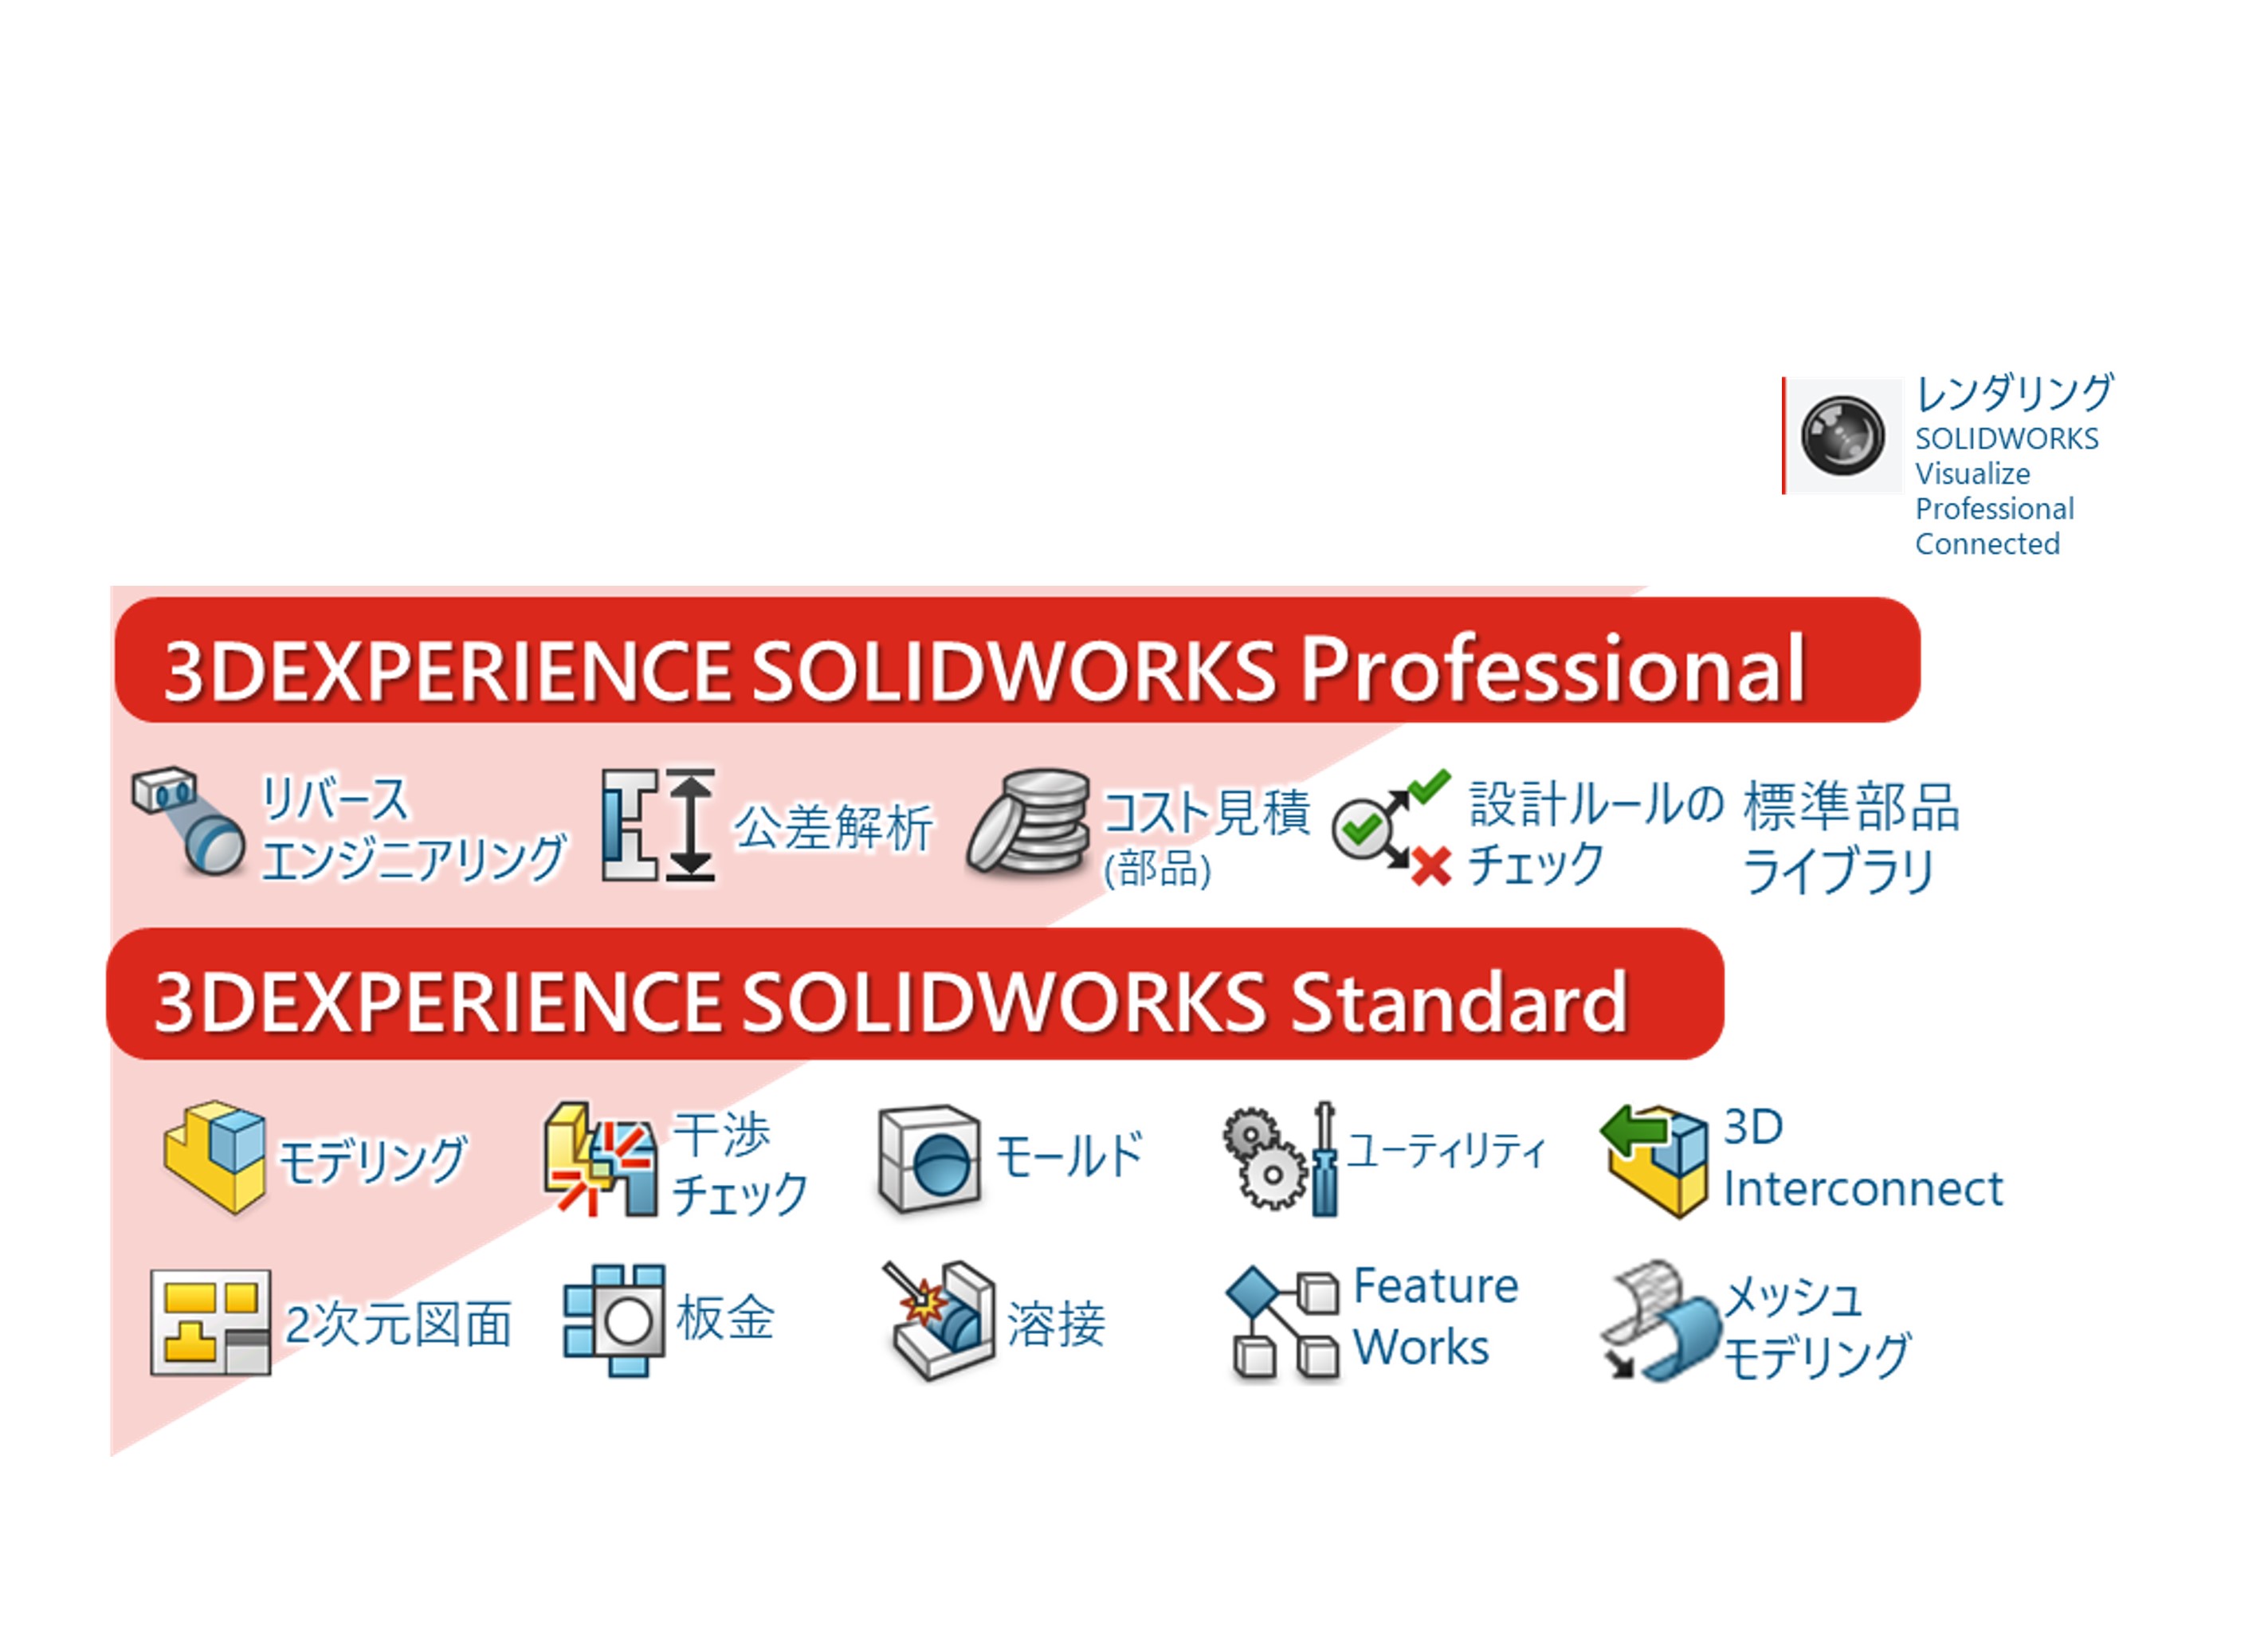 3DEXPERIENCE SOLIDWORKS Professional